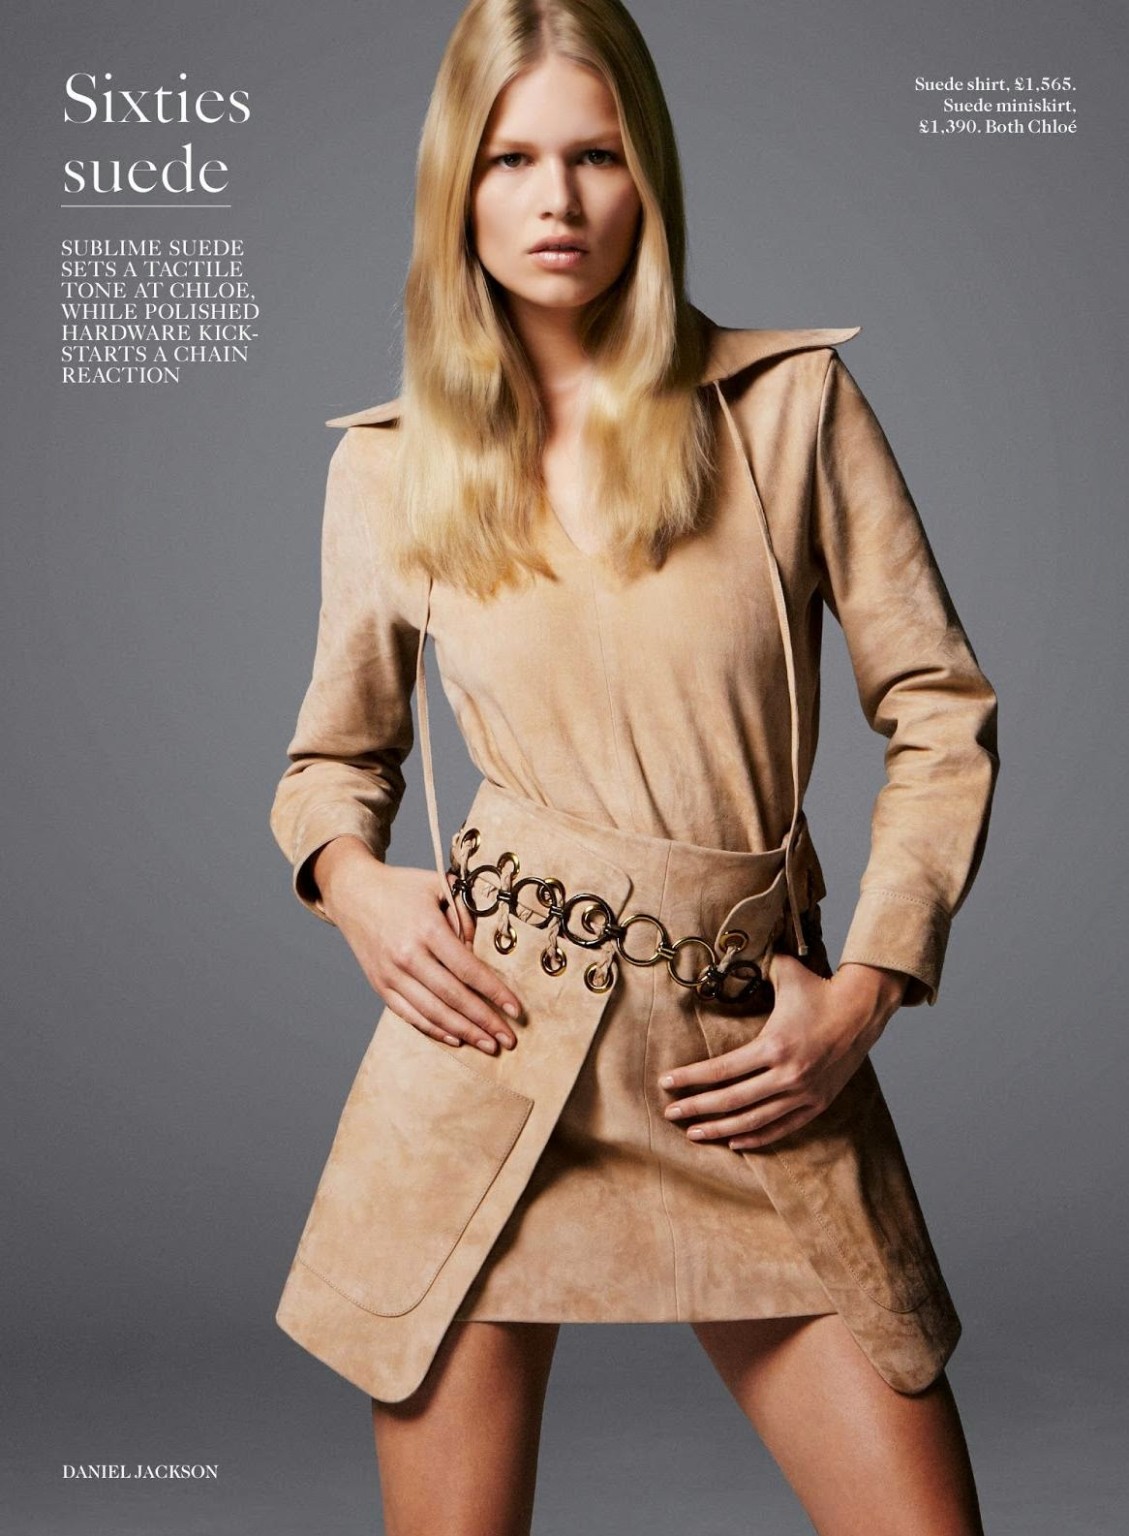 Anna Ewers looking very hot in February 2015 issue of Vogue UK #75175839